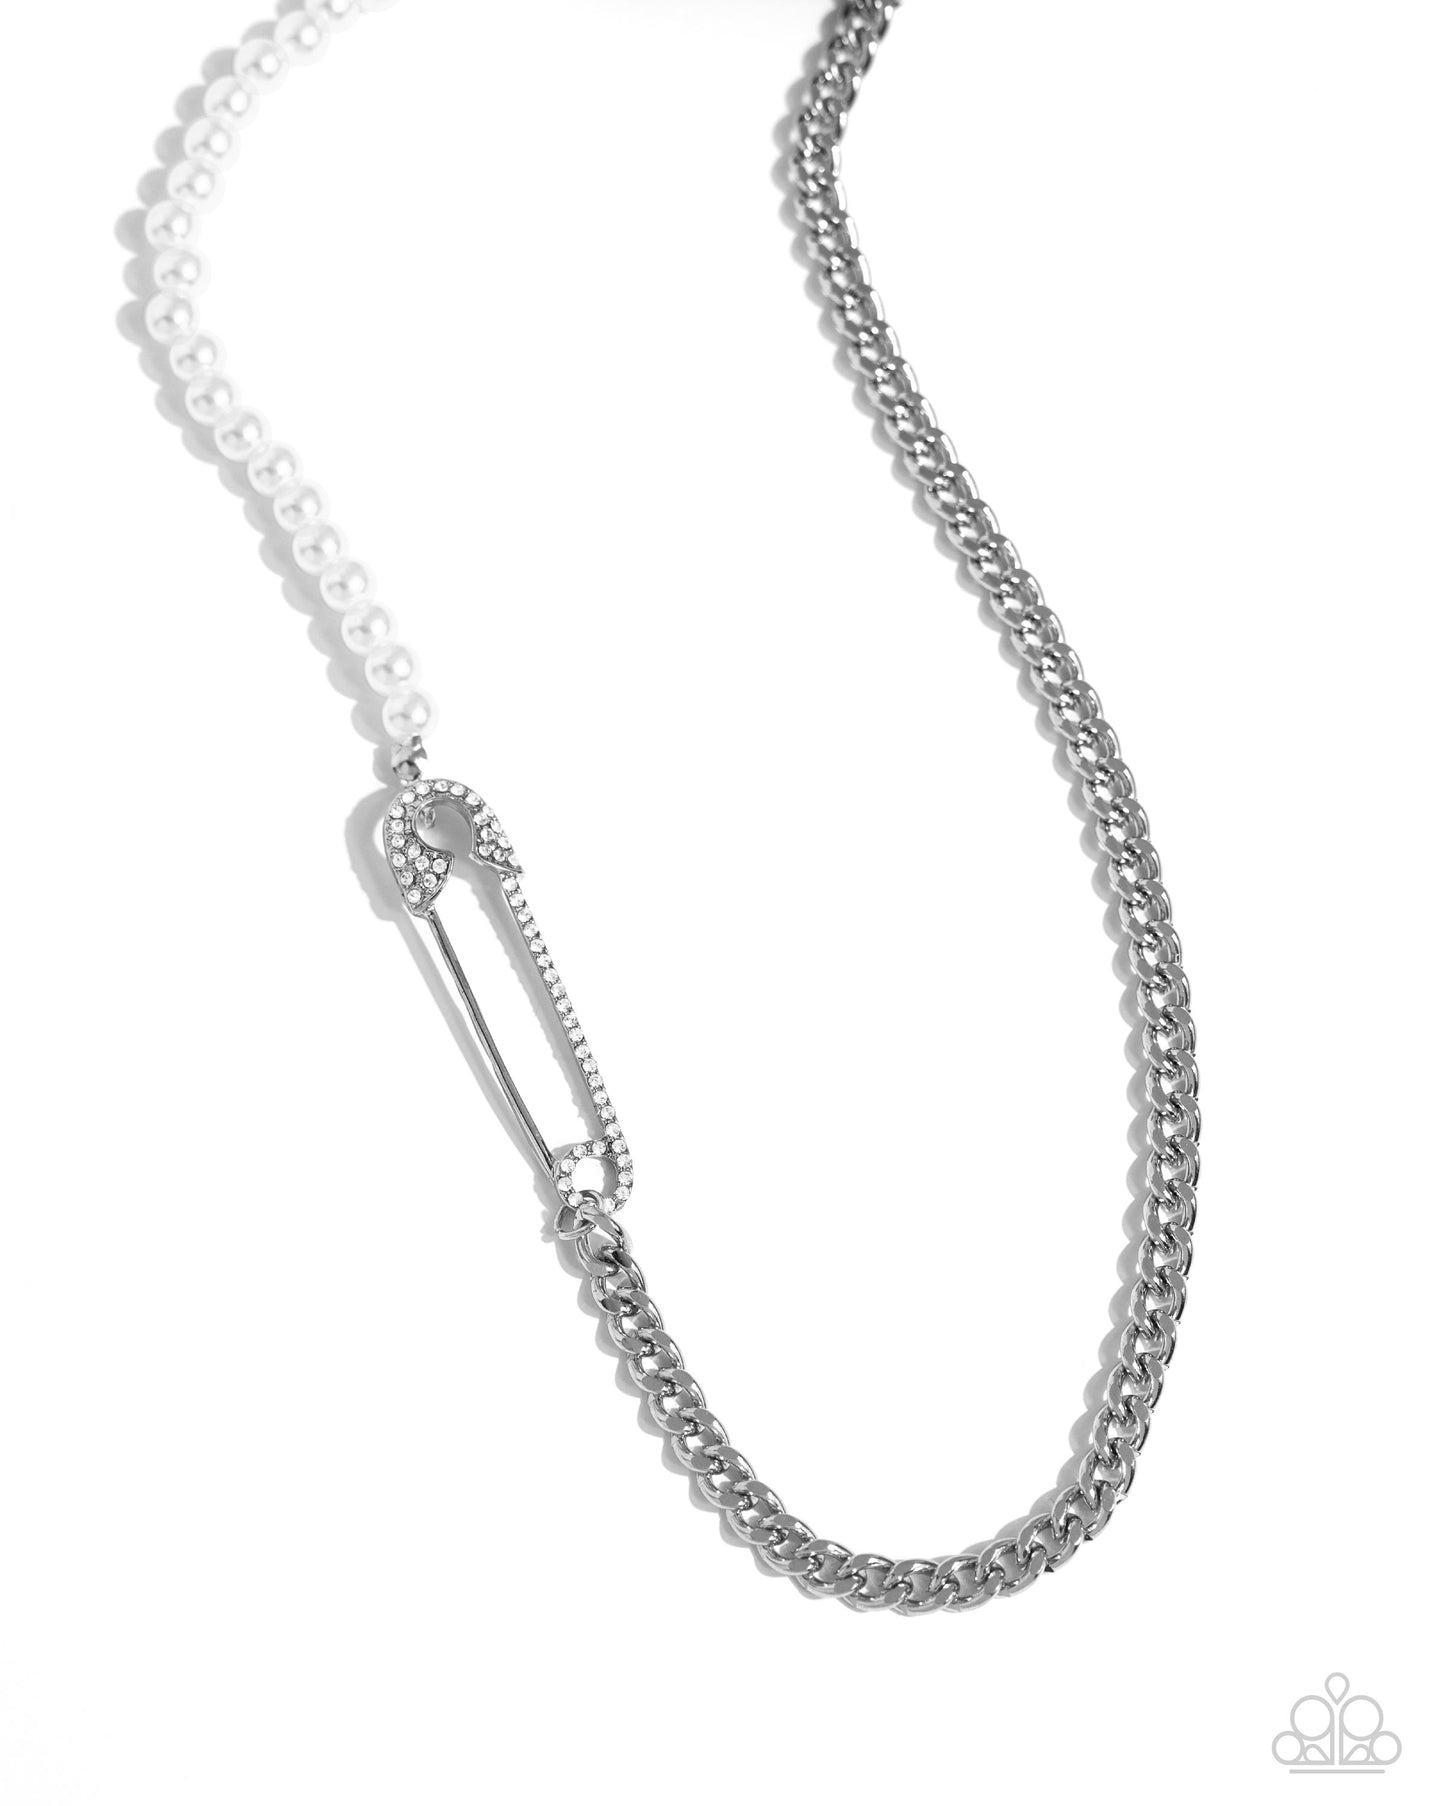 strand of white pearls collides with a layer of chain to create an abstract blend of grit and glitz. The links of the curb chain offset the pearly sheen of the beads that lay on the opposite side, perfectly balancing the contrasting design. A white rhinestone-embellished oversized safety pin charm connects the two strands for a surprising hint of edge. Features an adjustable claspSold as one individual necklace. Includes one pair of matching earrings. Earring: "Safety Pin Sentiment - White"